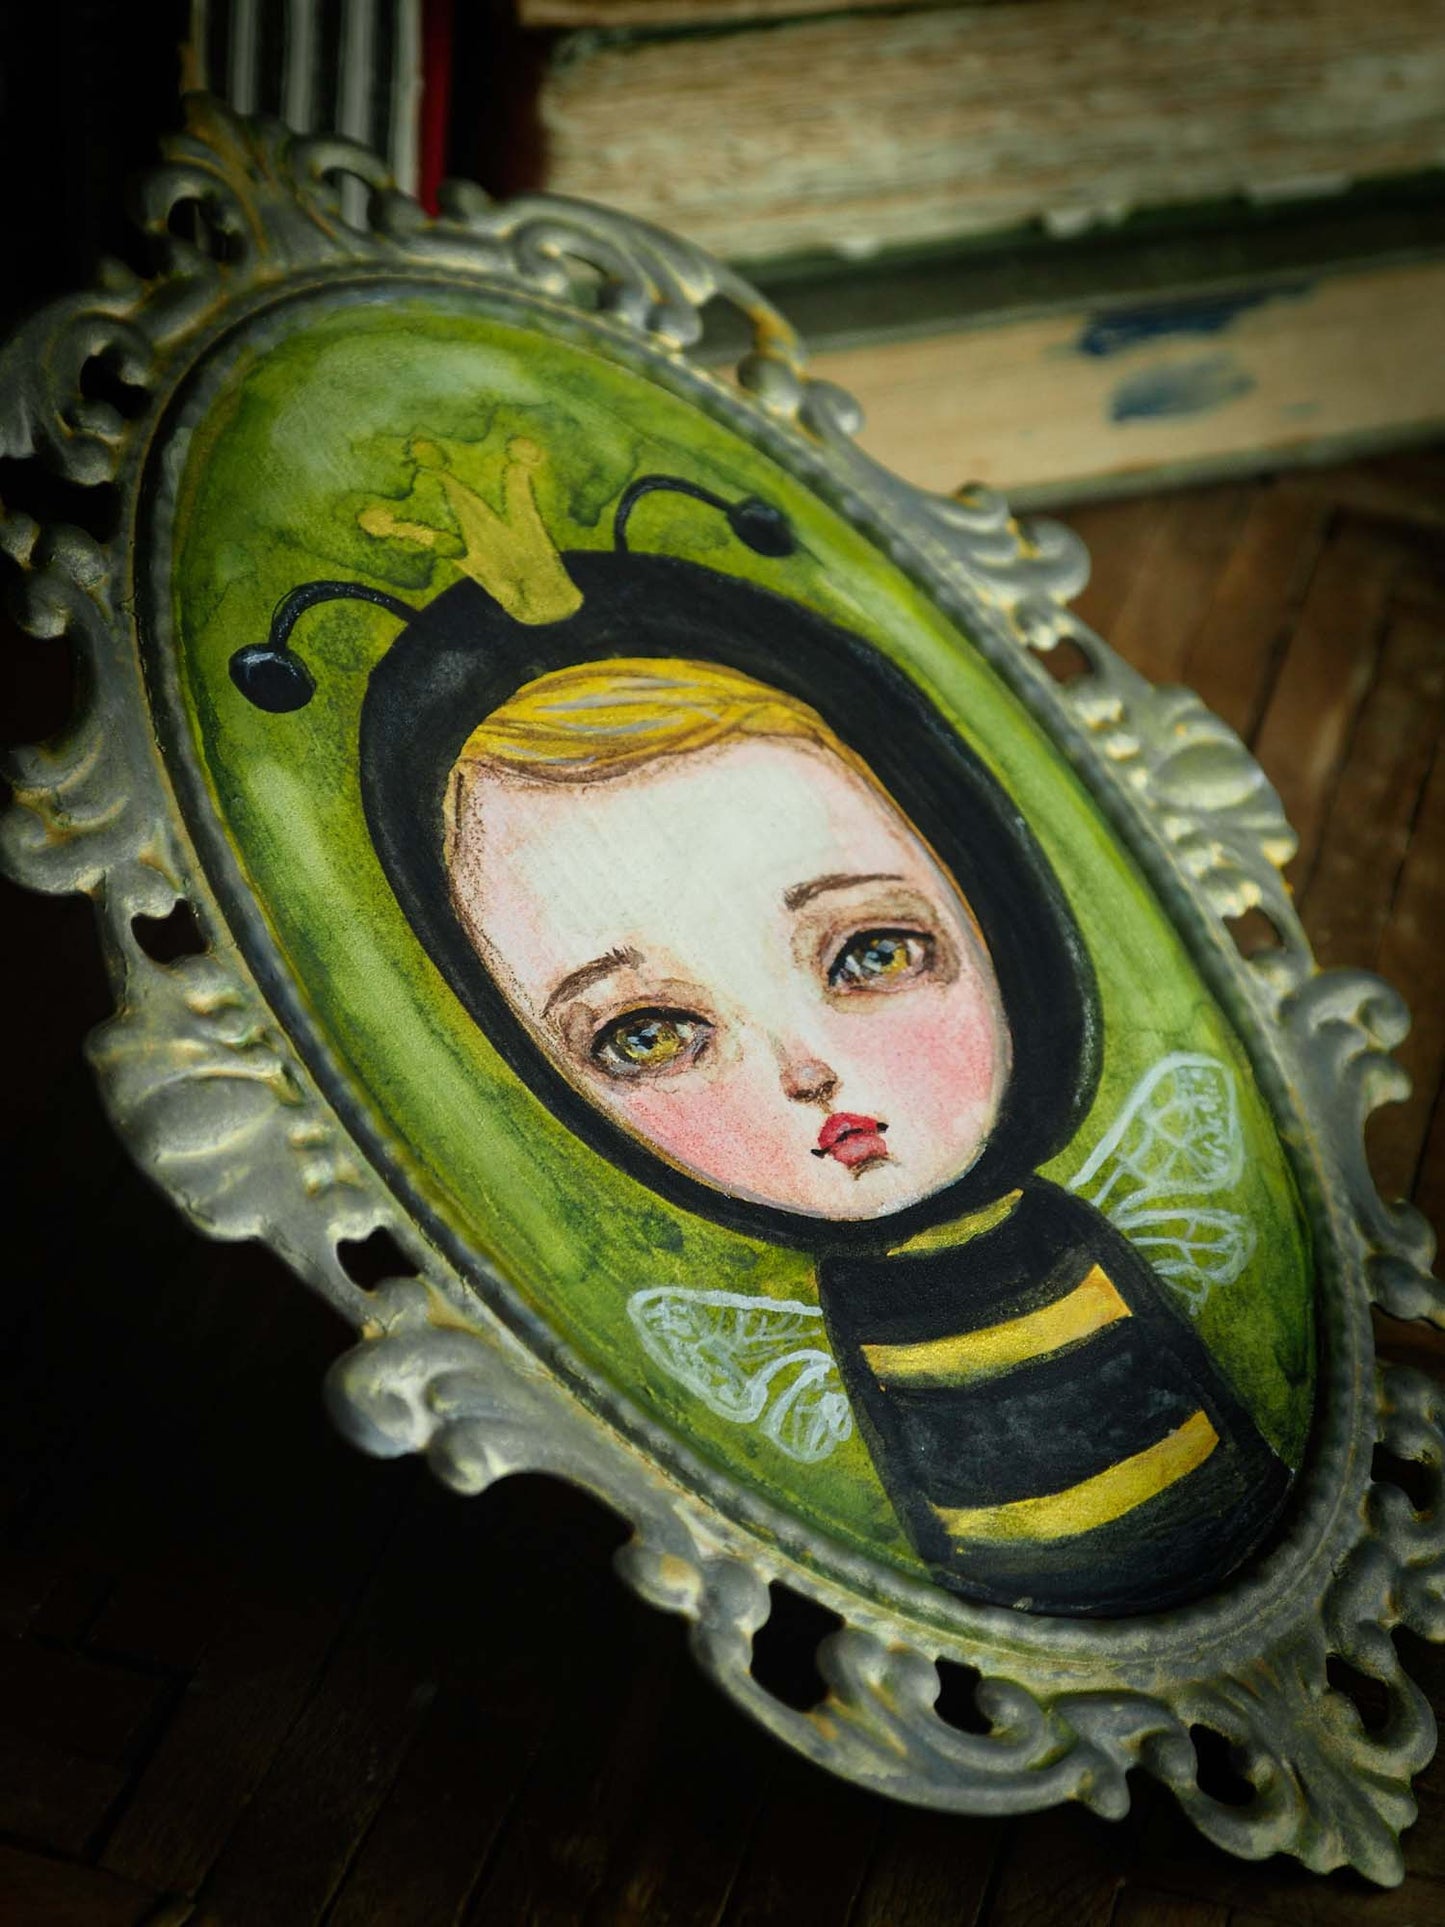 Inspired by the son of Danita, a little boy in bee costume is a cute spring painting